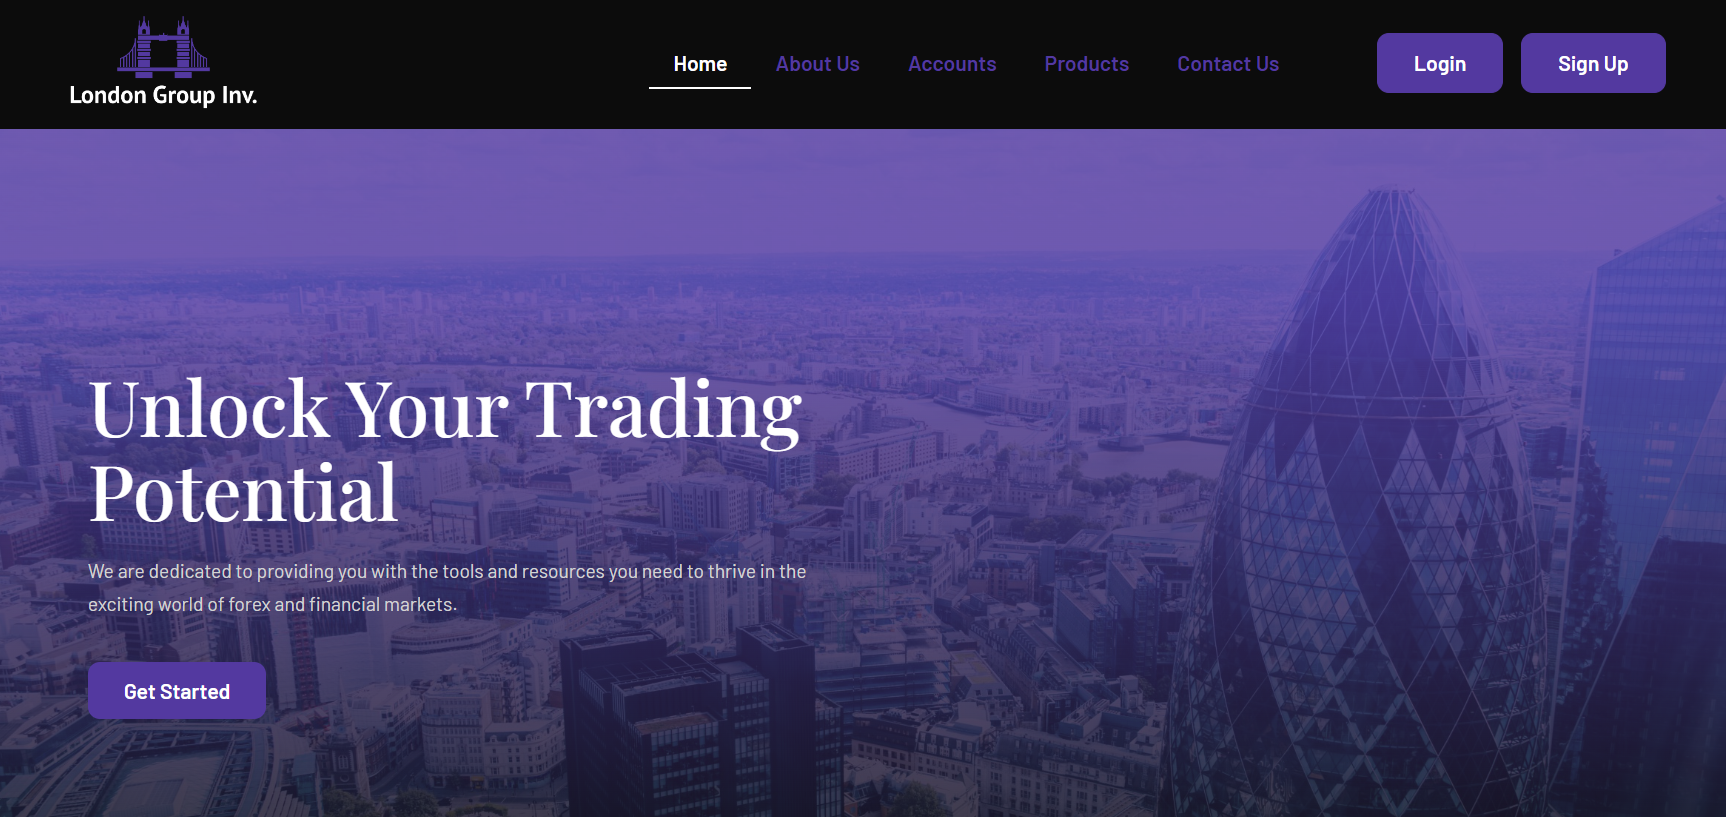 trading the markets with London Group Inv. 